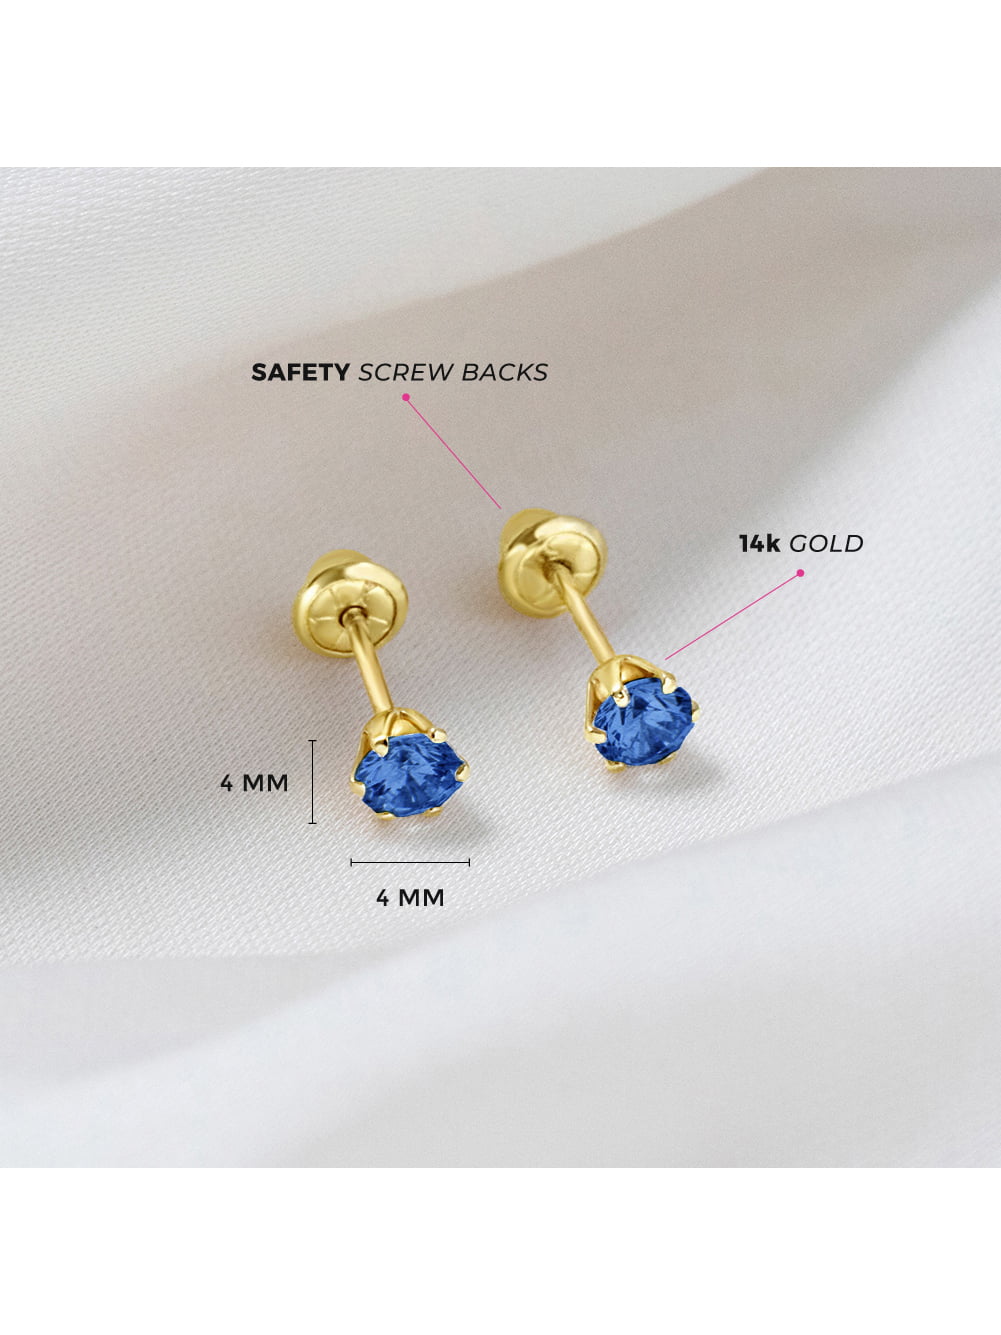 Radiant Prong Simulated Sapphire Toddler Earrings Safety Screw